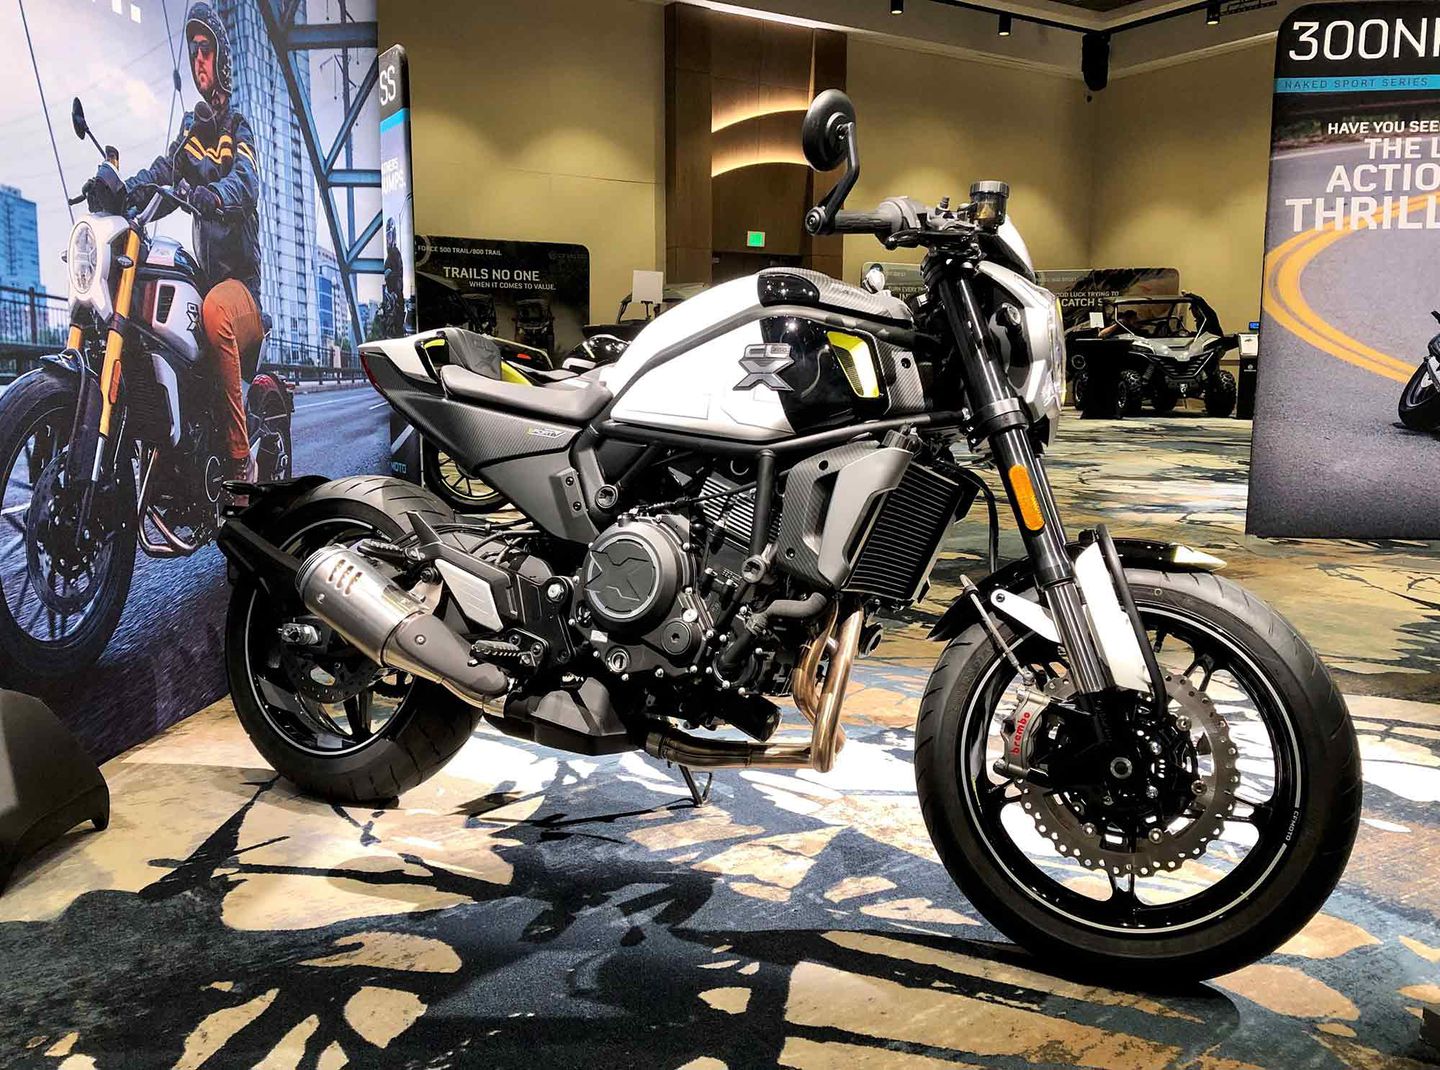 The 700CL-X Sport is powered by the same 693cc engine but adds clip-ons and rearsets for a sportier riding position. Higher-spec brakes also earn it a higher price tag